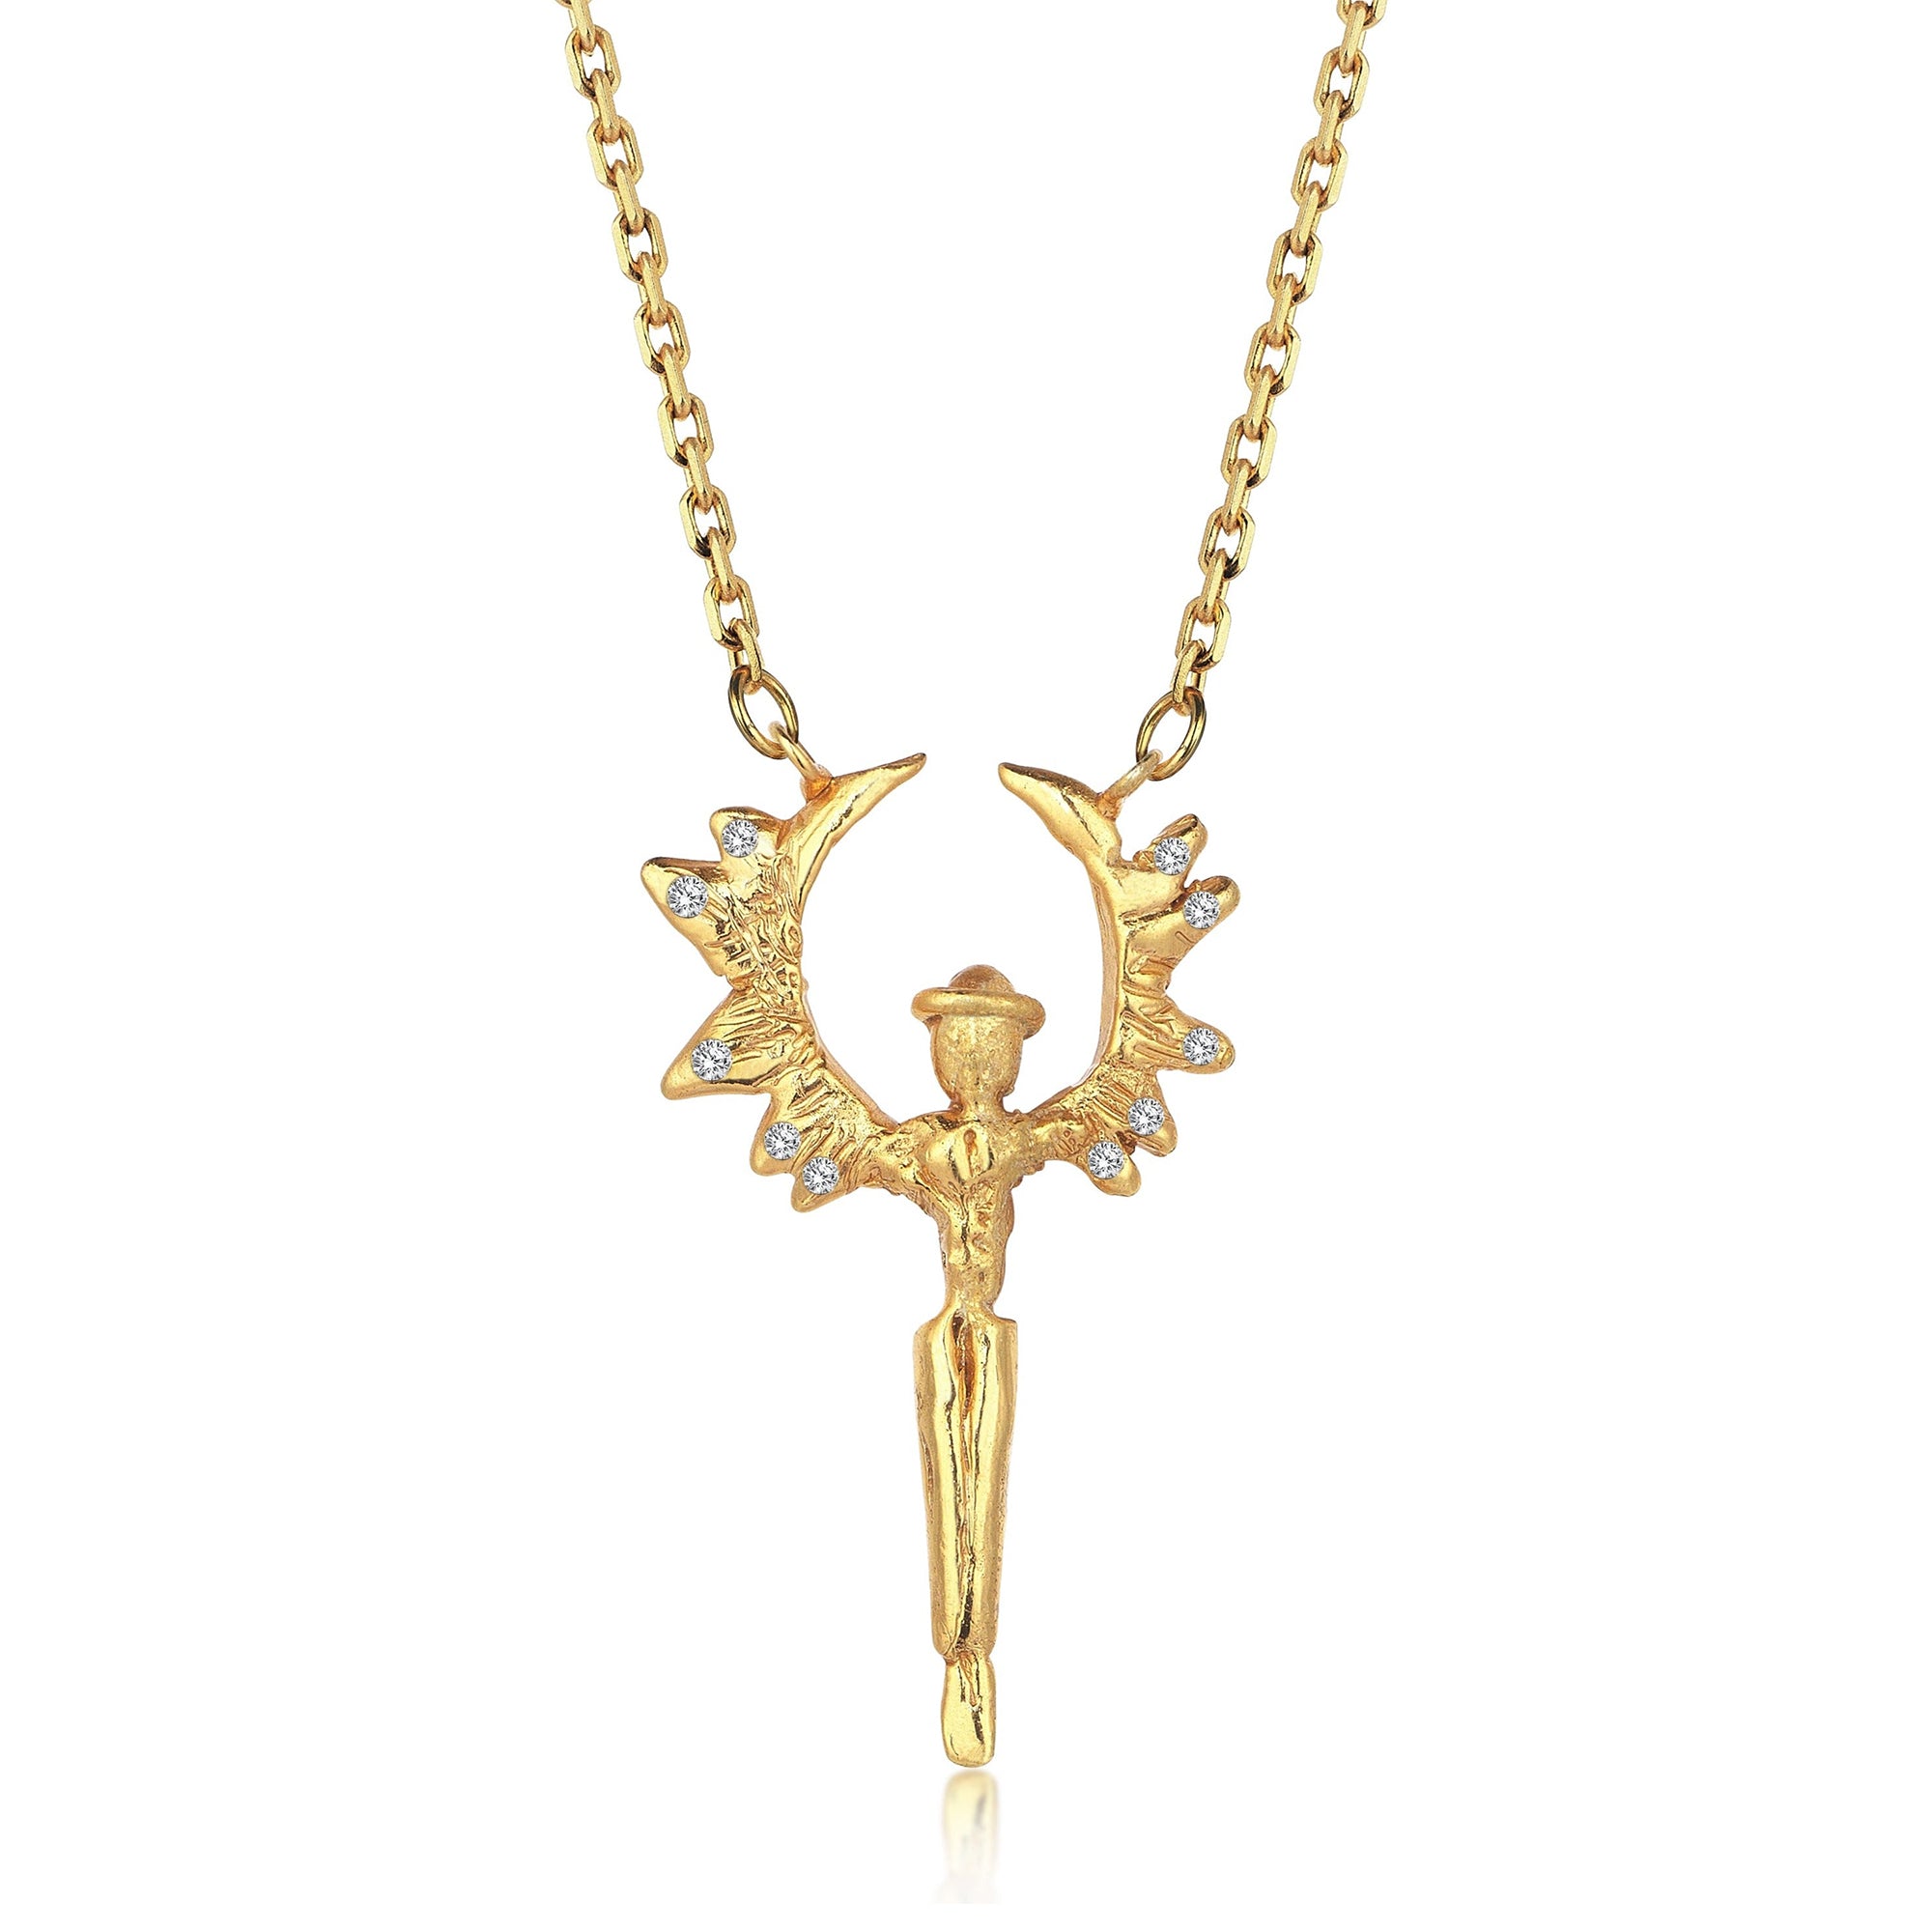 THE ARCHANGEL NECKLACE